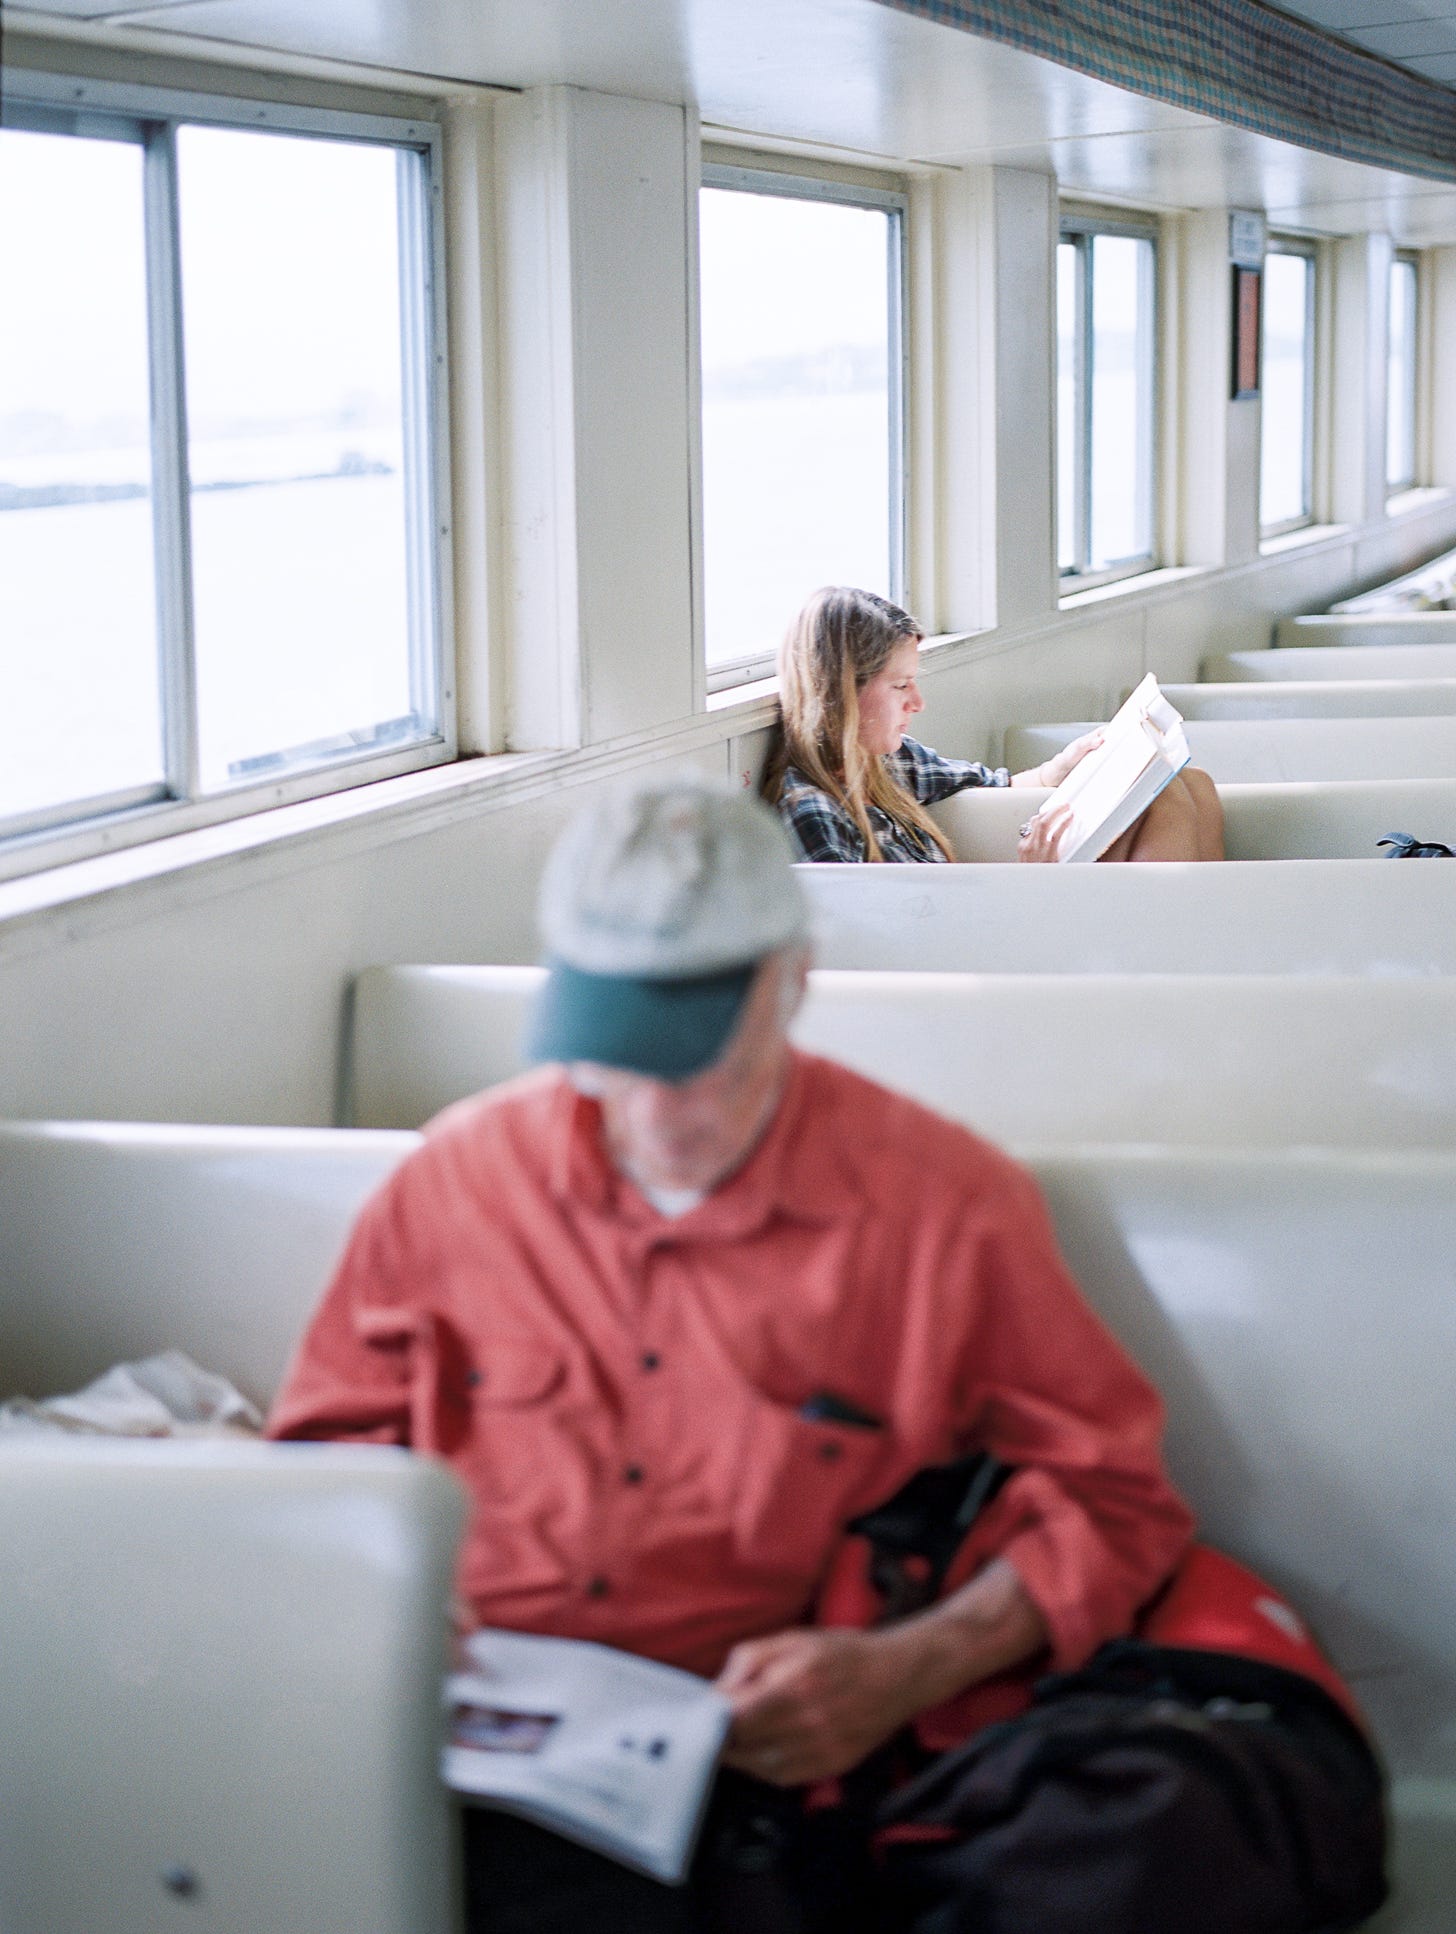 A photo of two people reading on a ferry